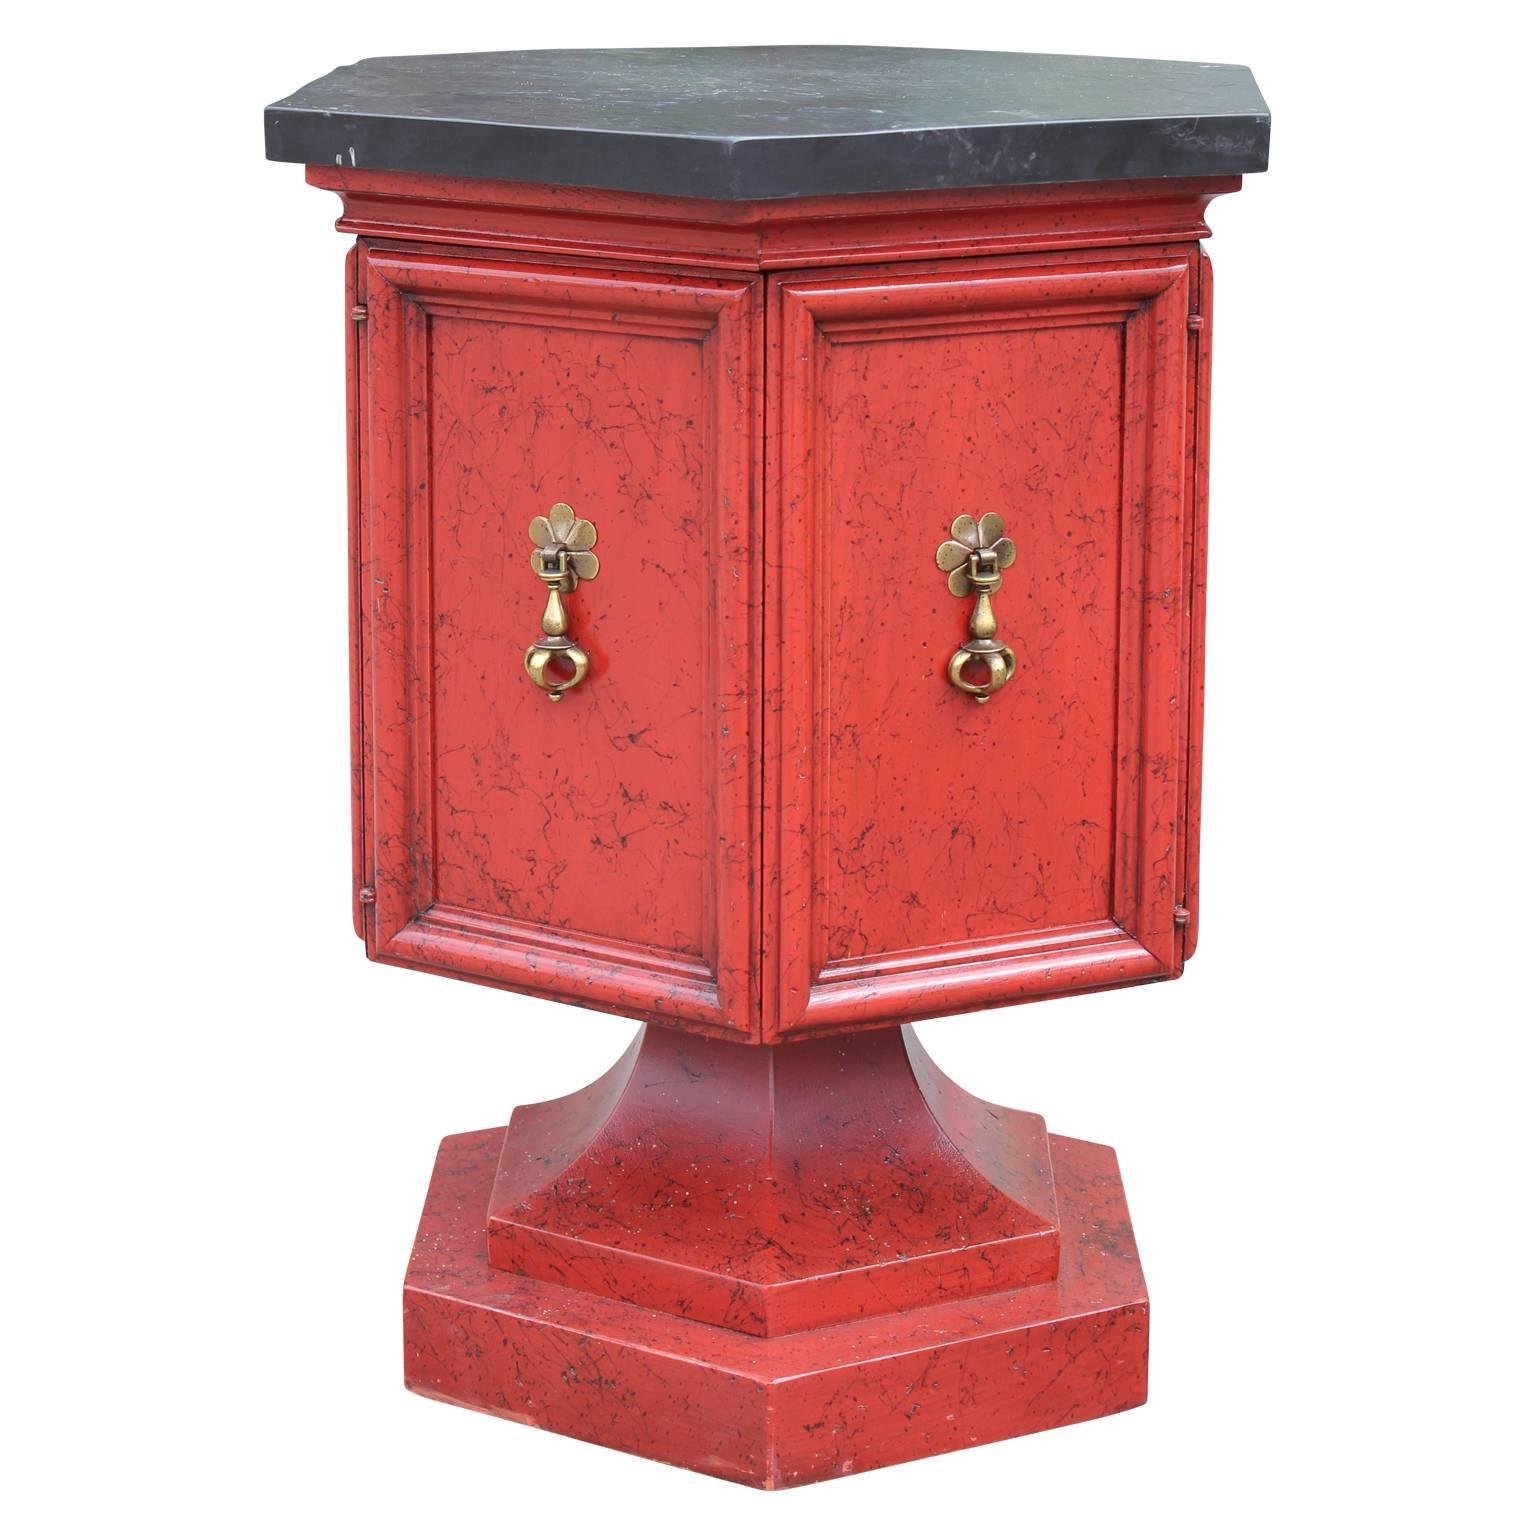 Pair of Hollywood Regency Hexagon slate top red and black pedestal side or end tables with brass hardware. The two doors open to reveal a small cabinet space.